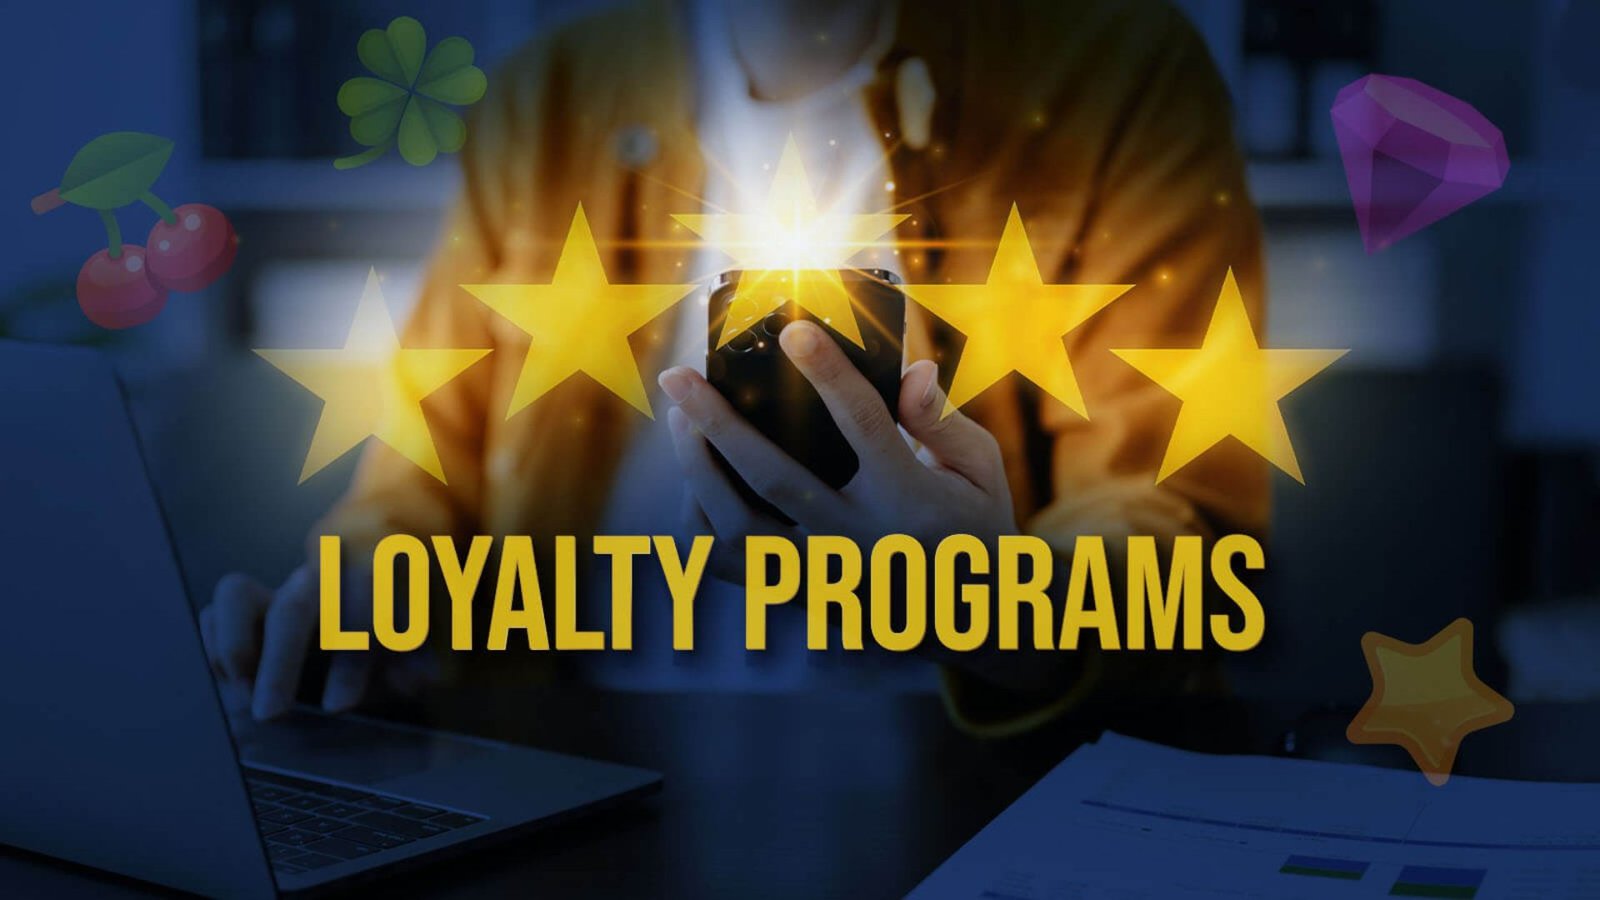 this image shows Online Casino Loyalty programs